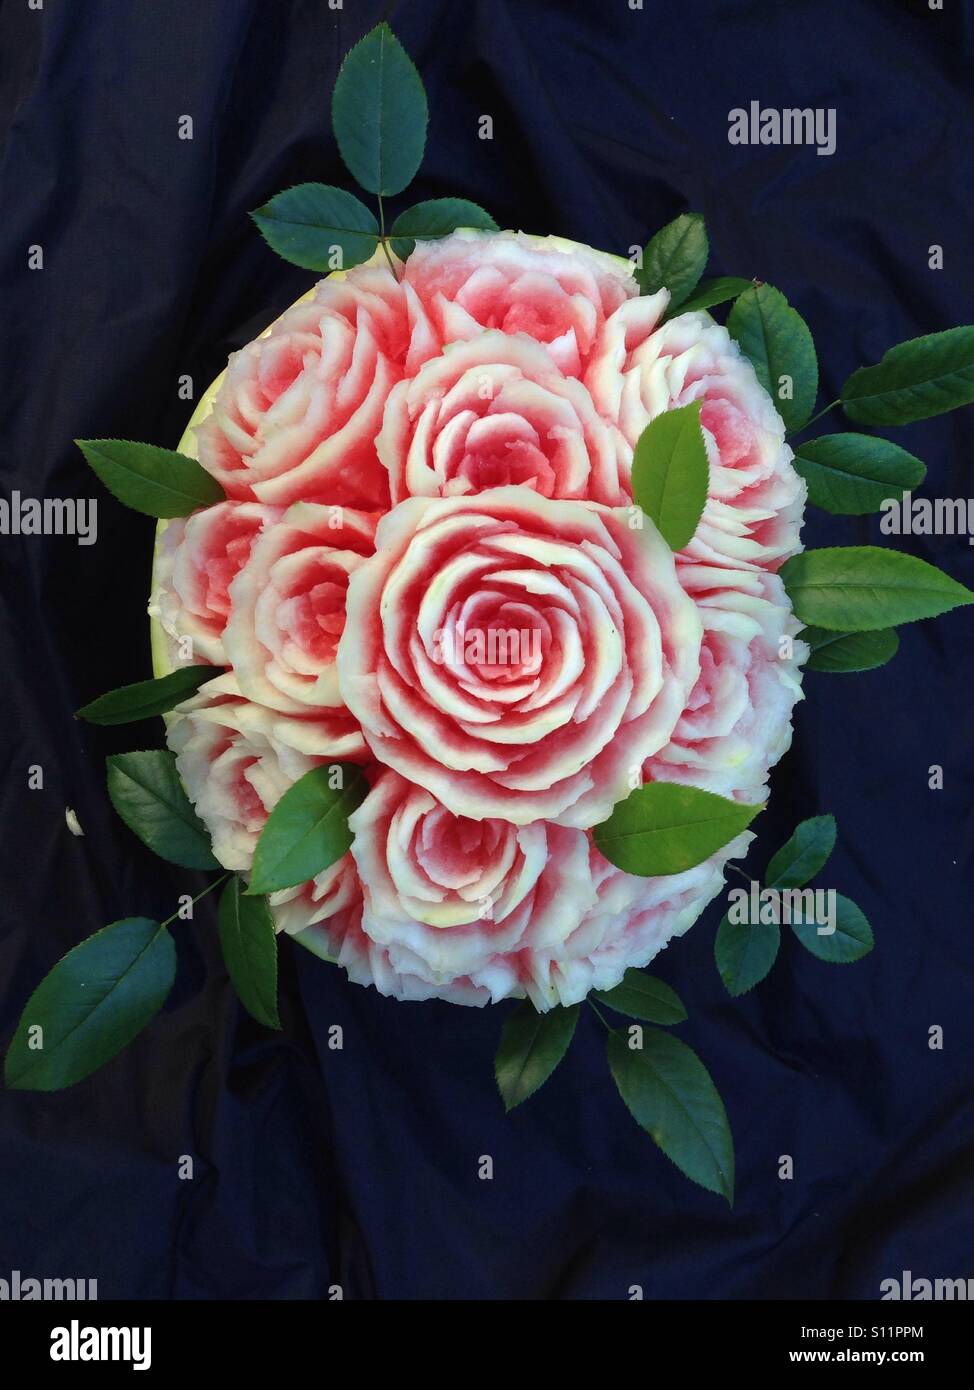 Fruit carving of roses using a watermelon Stock Photo